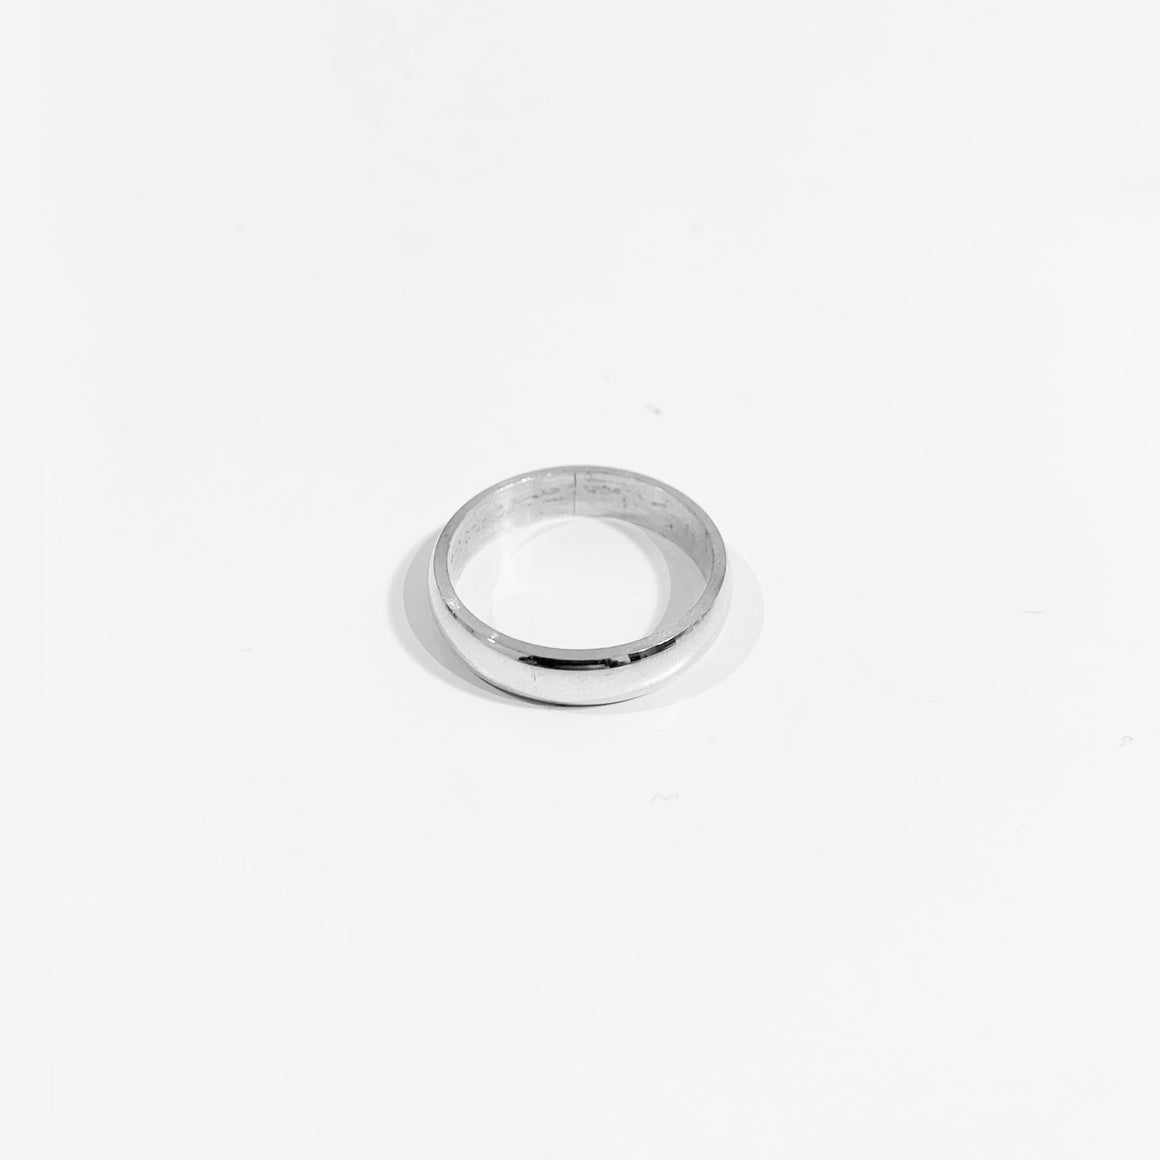 54 FLORAL 6mm BAND SIGNET RING - SILVER